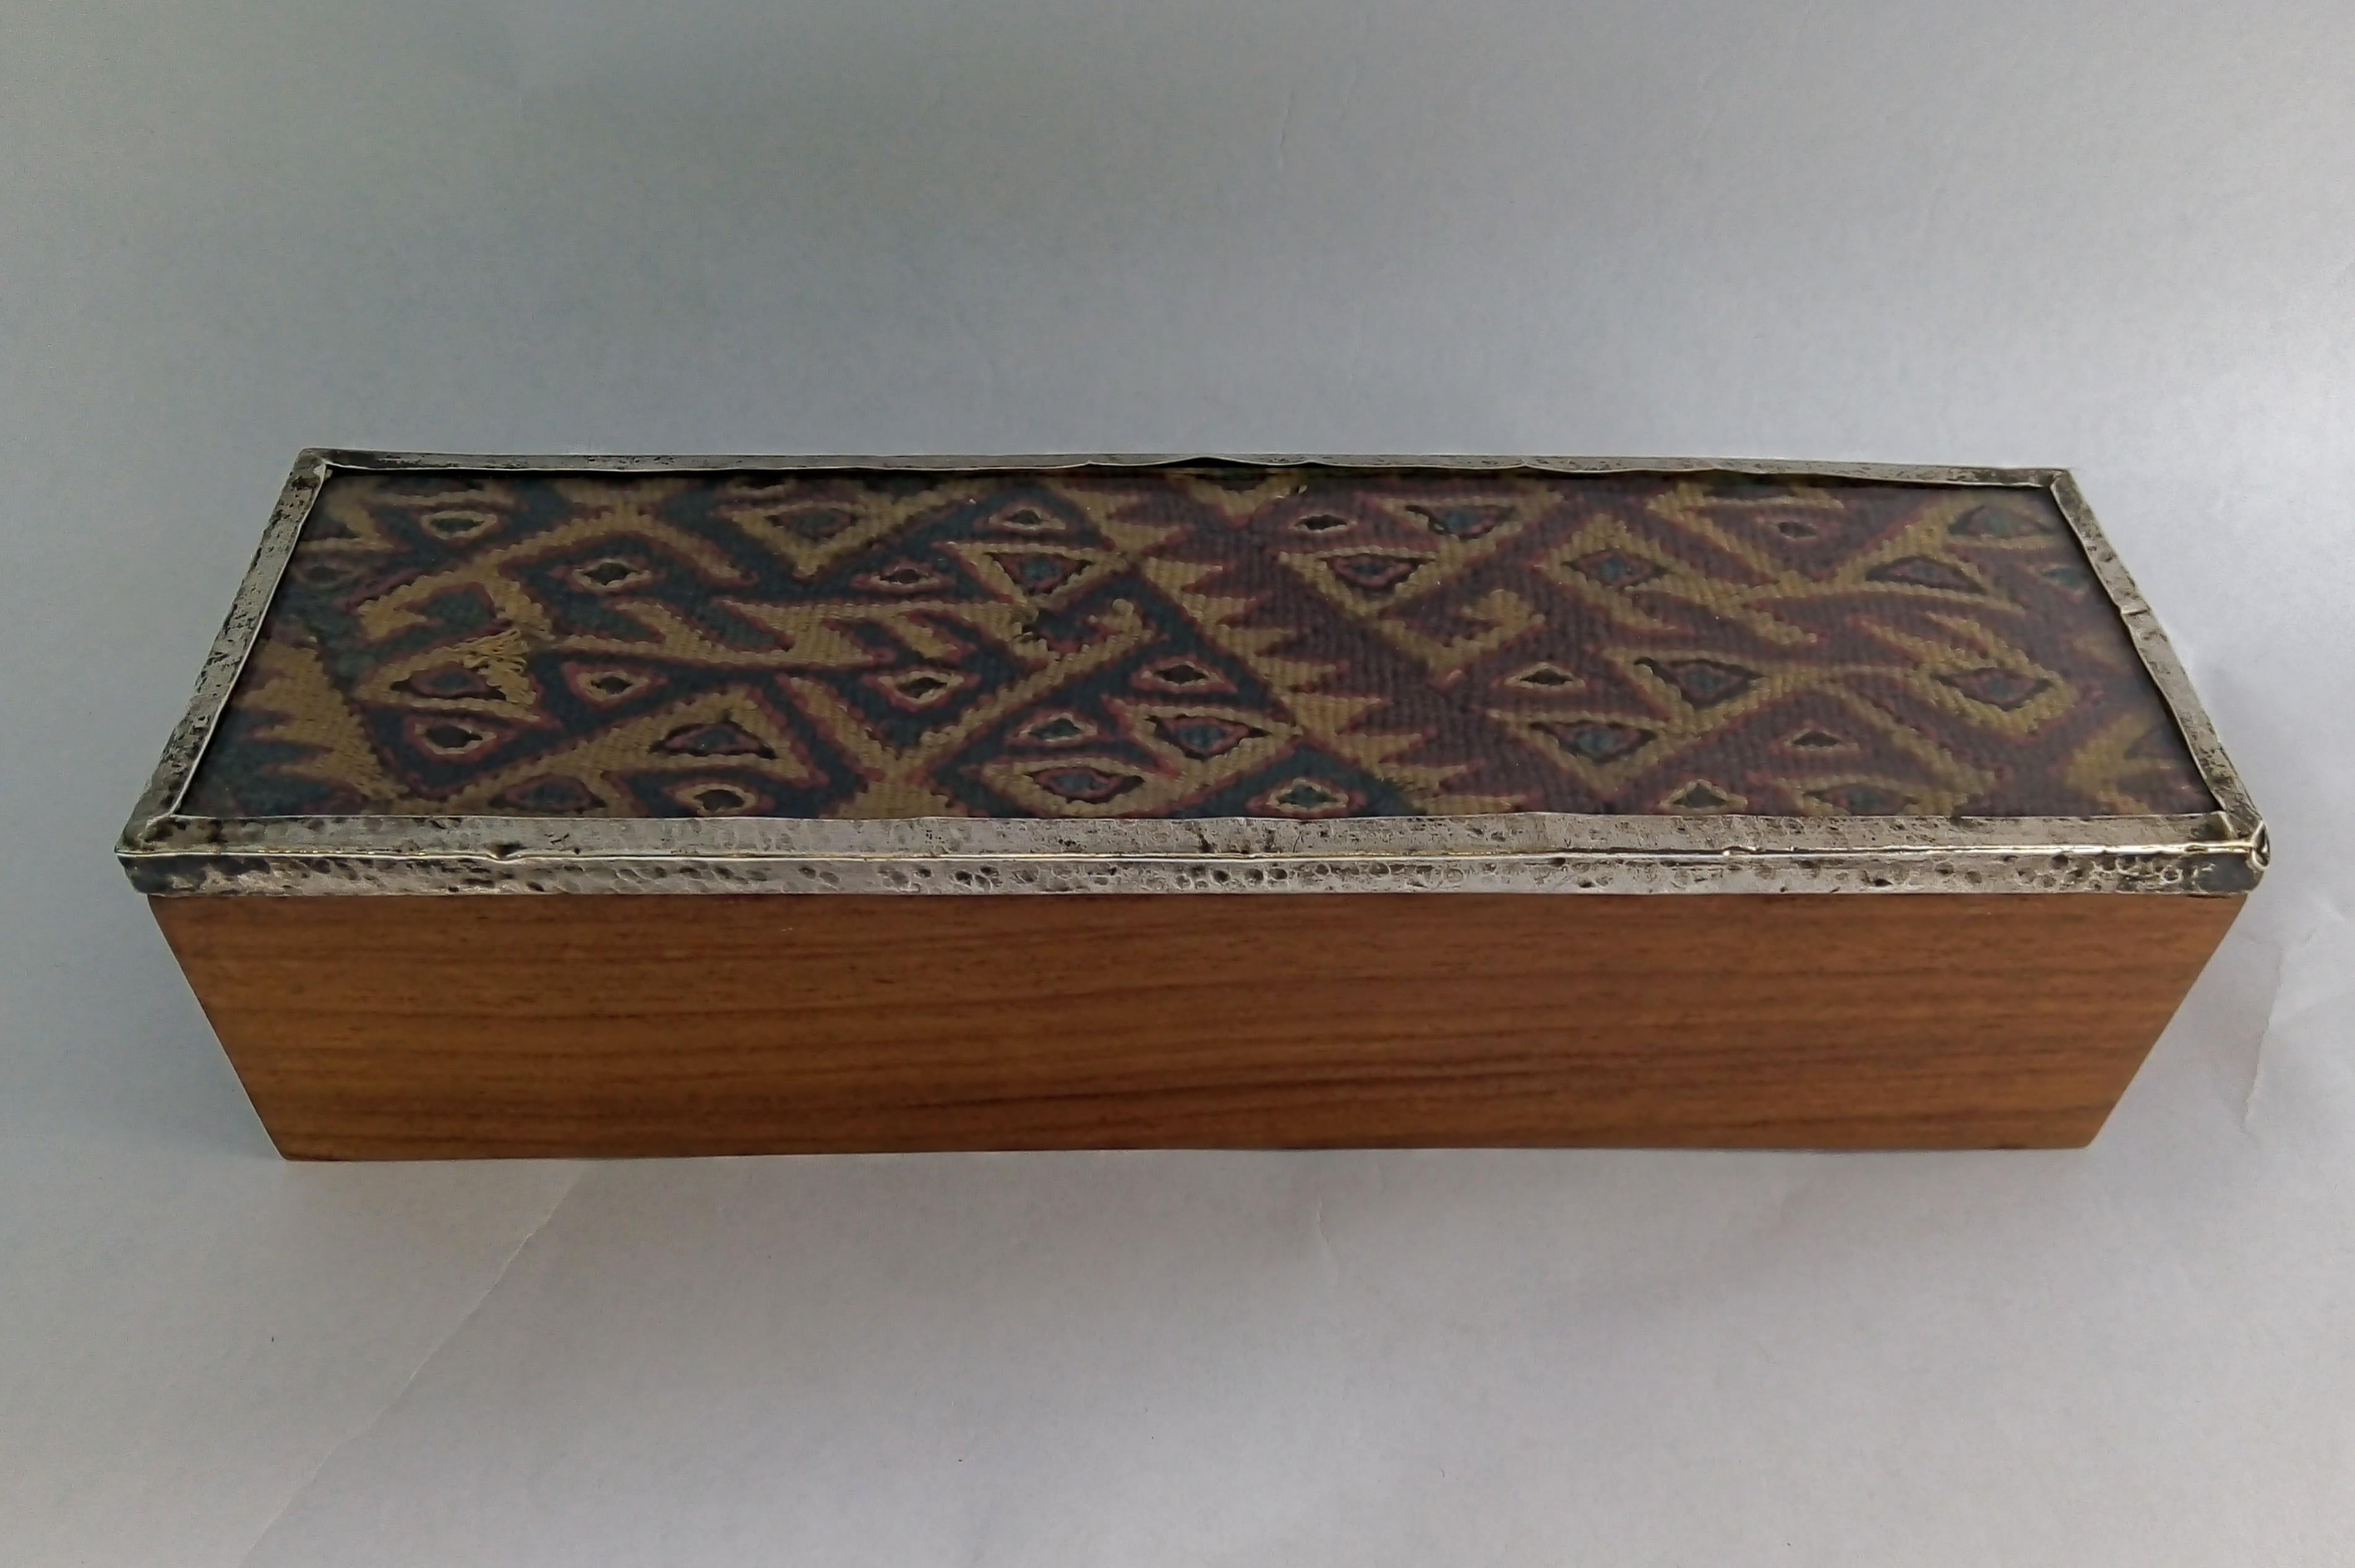 Tribal Beautiful Wooden Box with Silver Rim and Chancay Textile Fragment from Peru For Sale